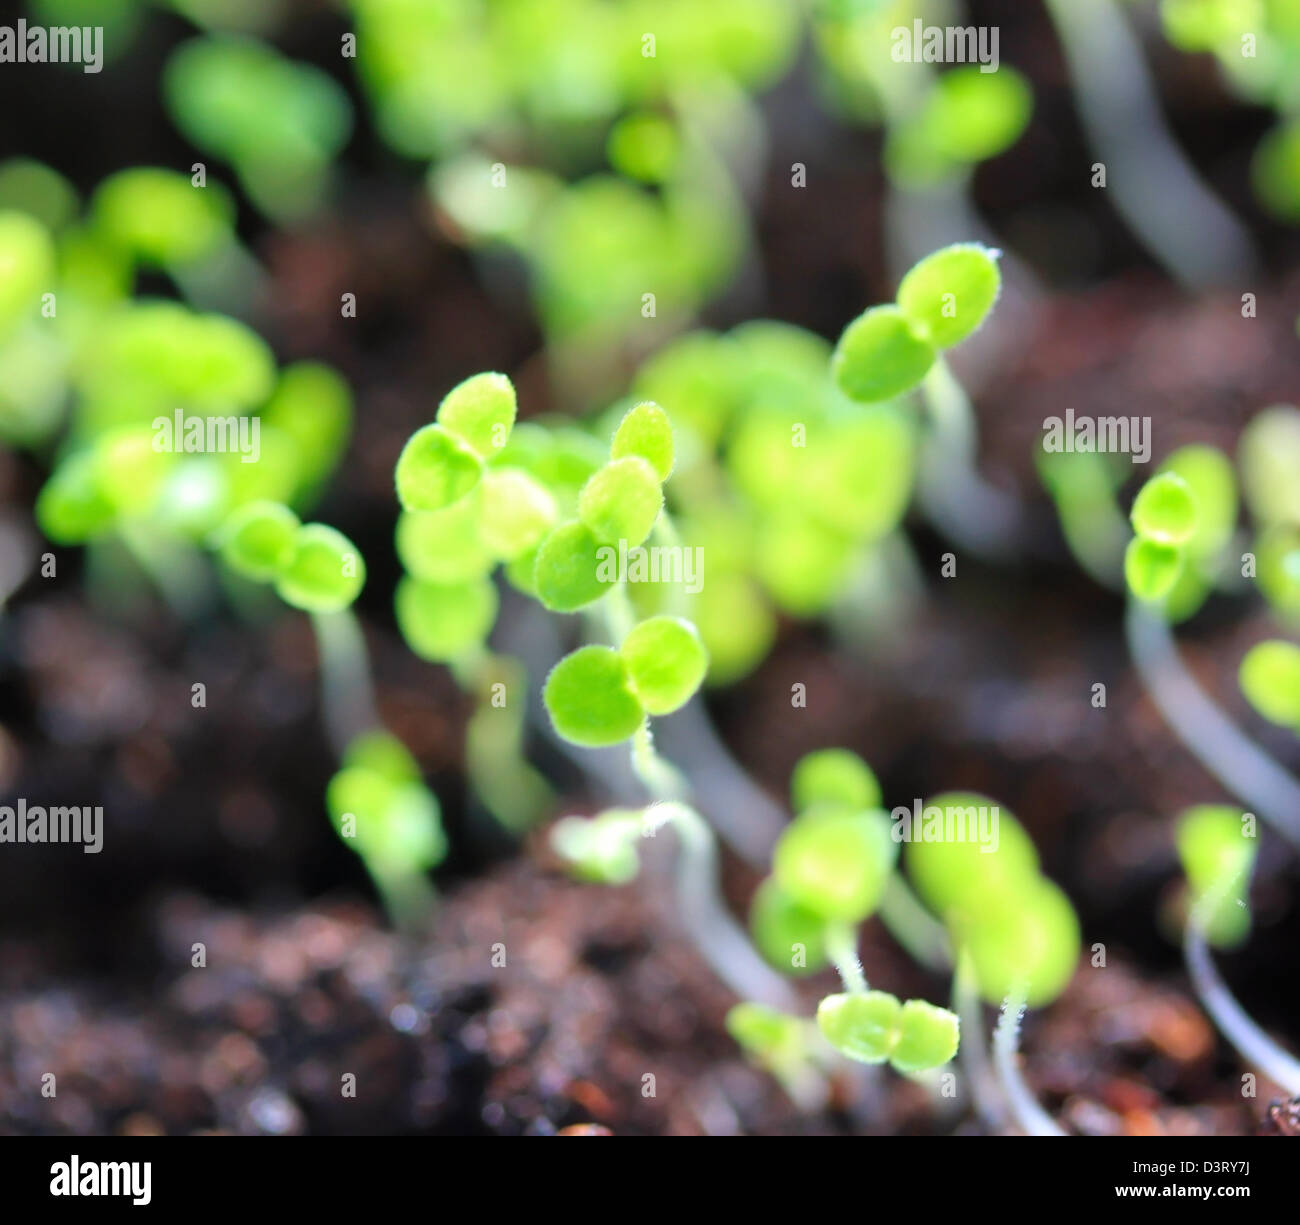 Group of small young plants Stock Photo